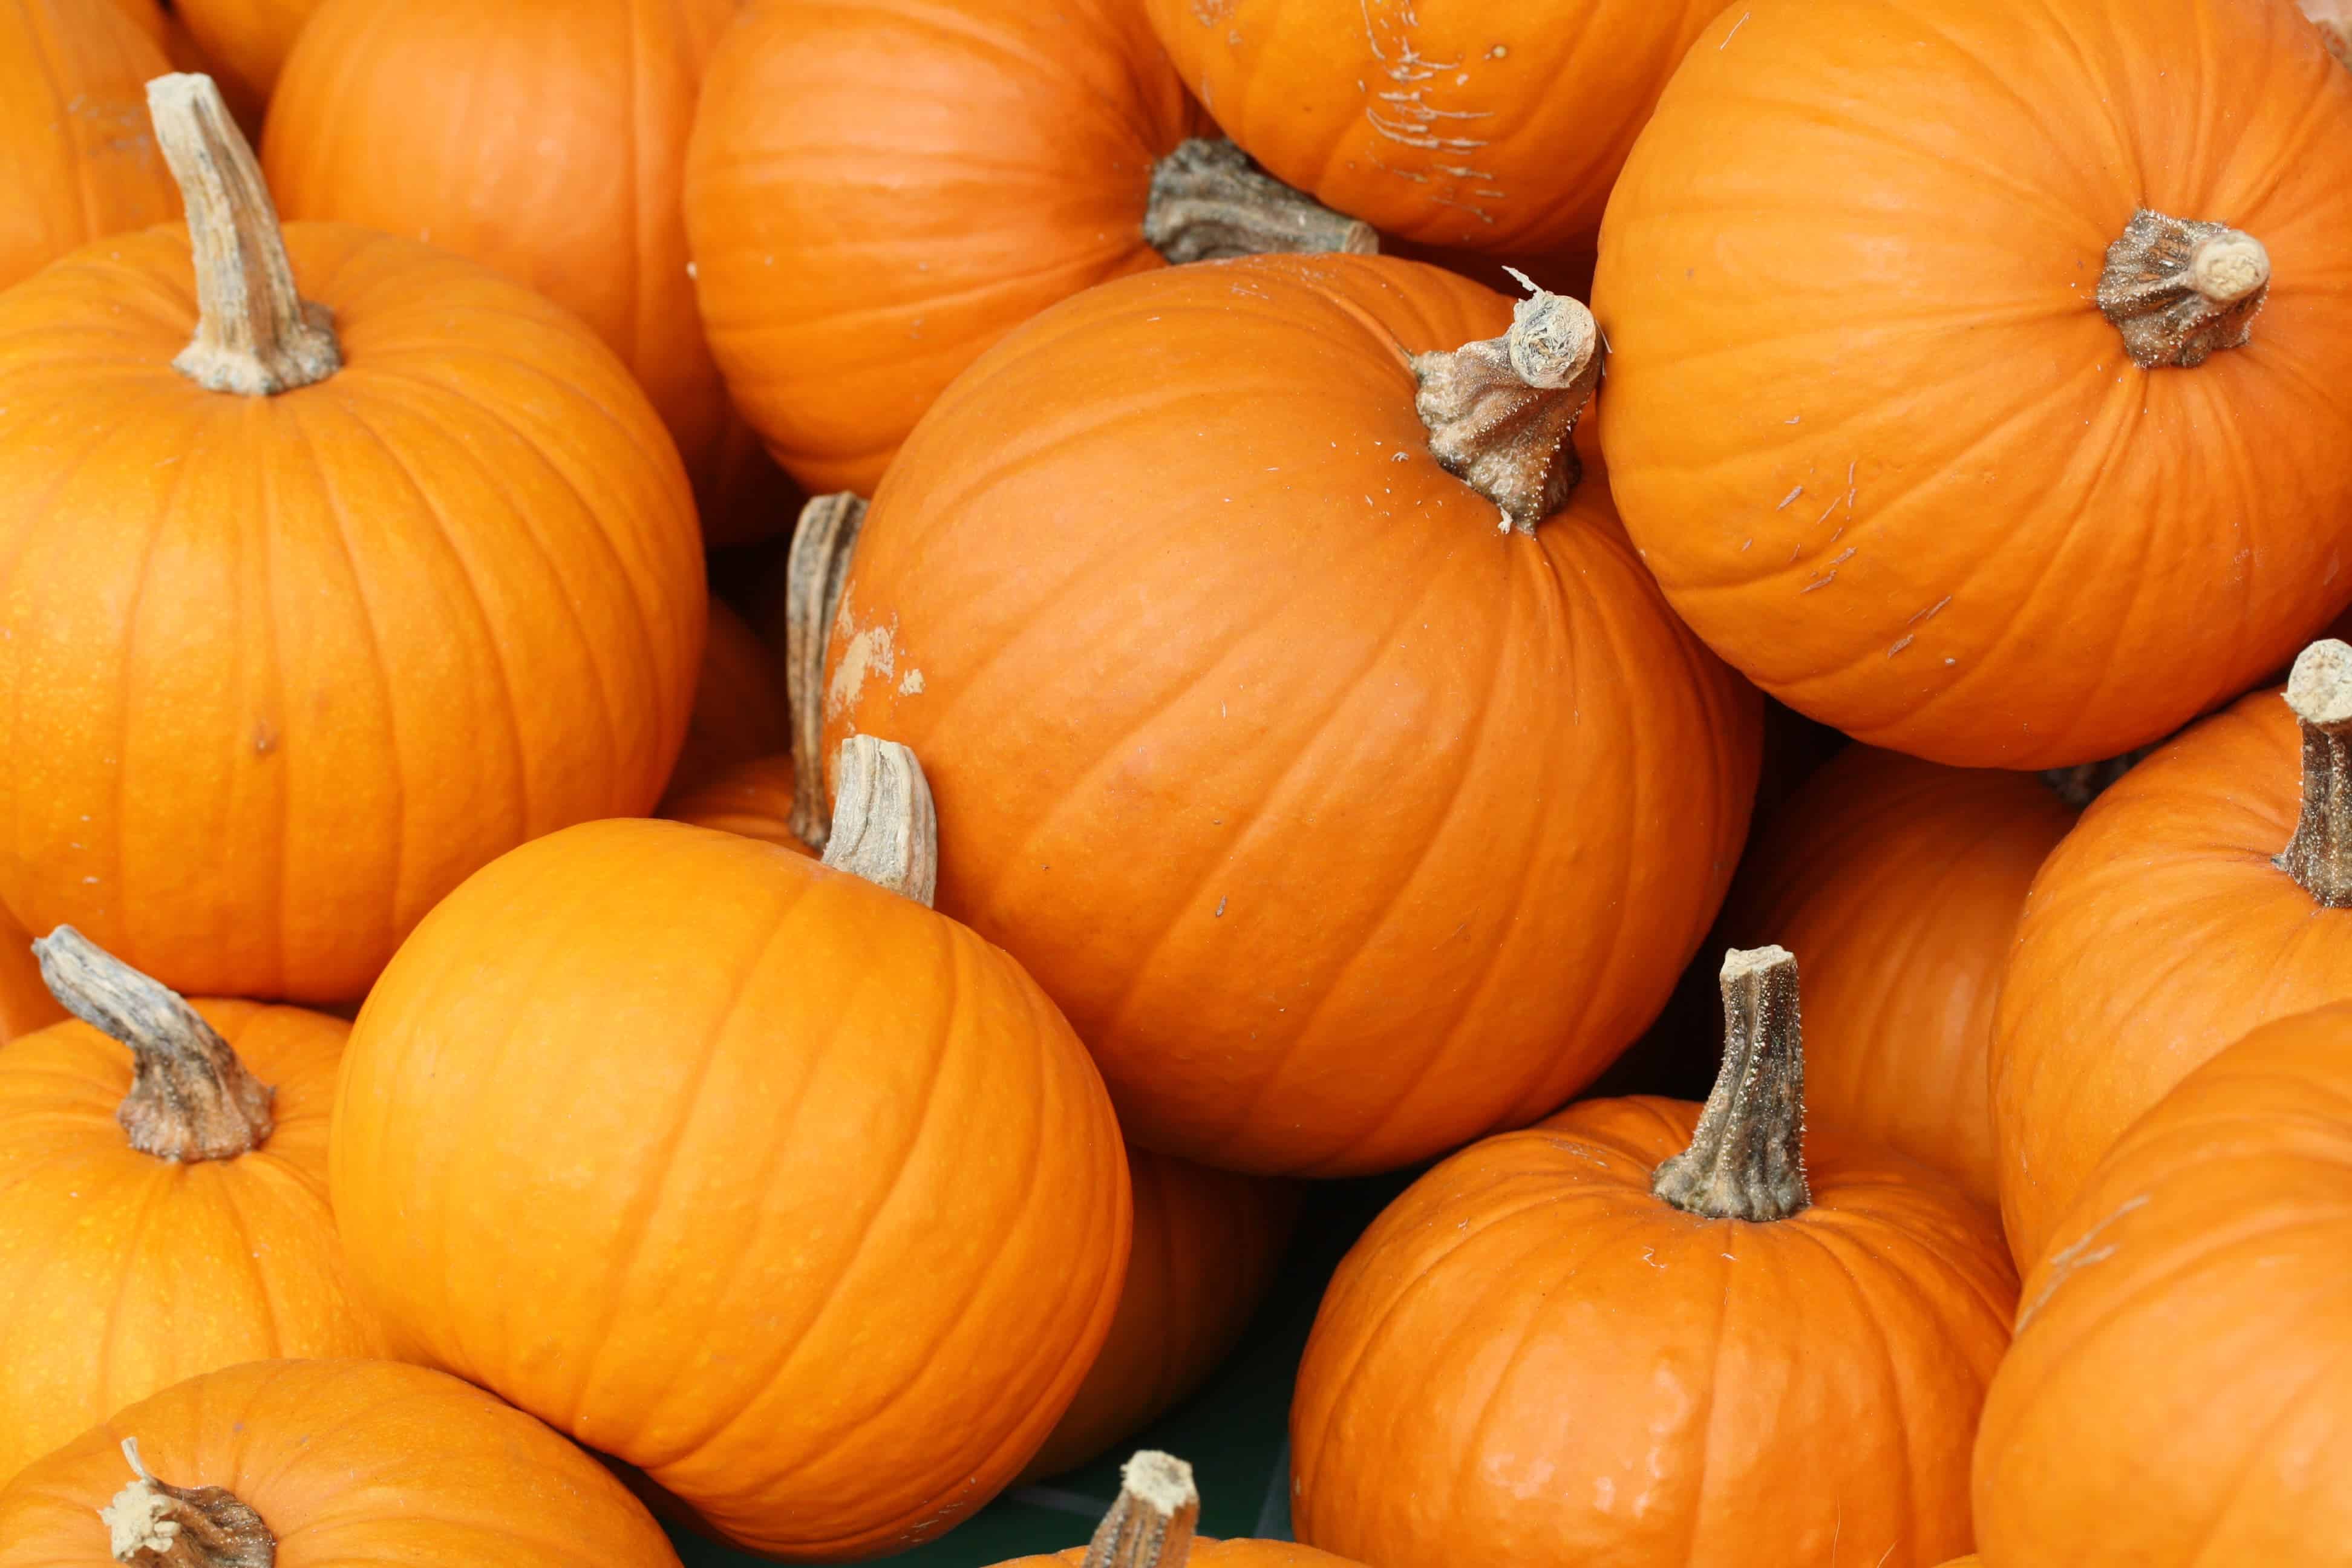 Pumpkins are a commercially important food source. Image credits:  Danielle Scott.